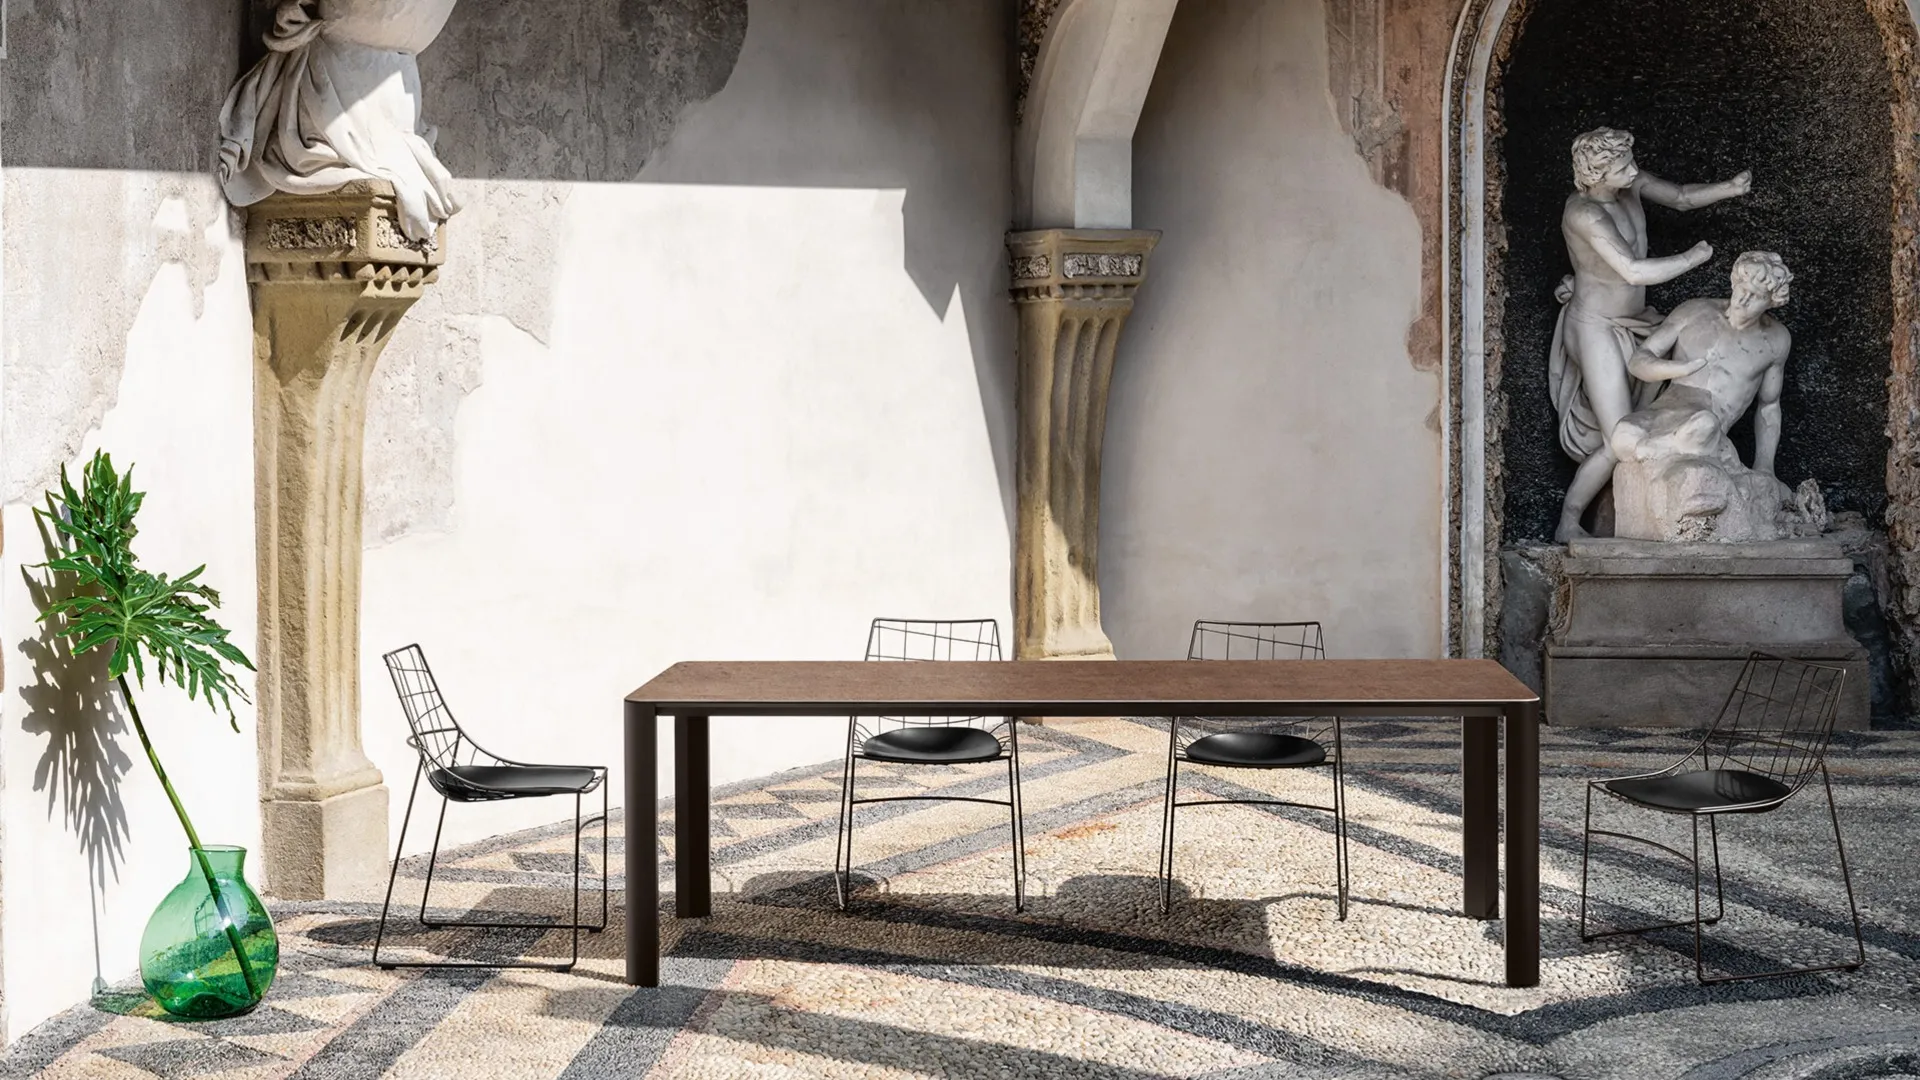 The Kodo outdoor table in ceramic and Keyah chairs